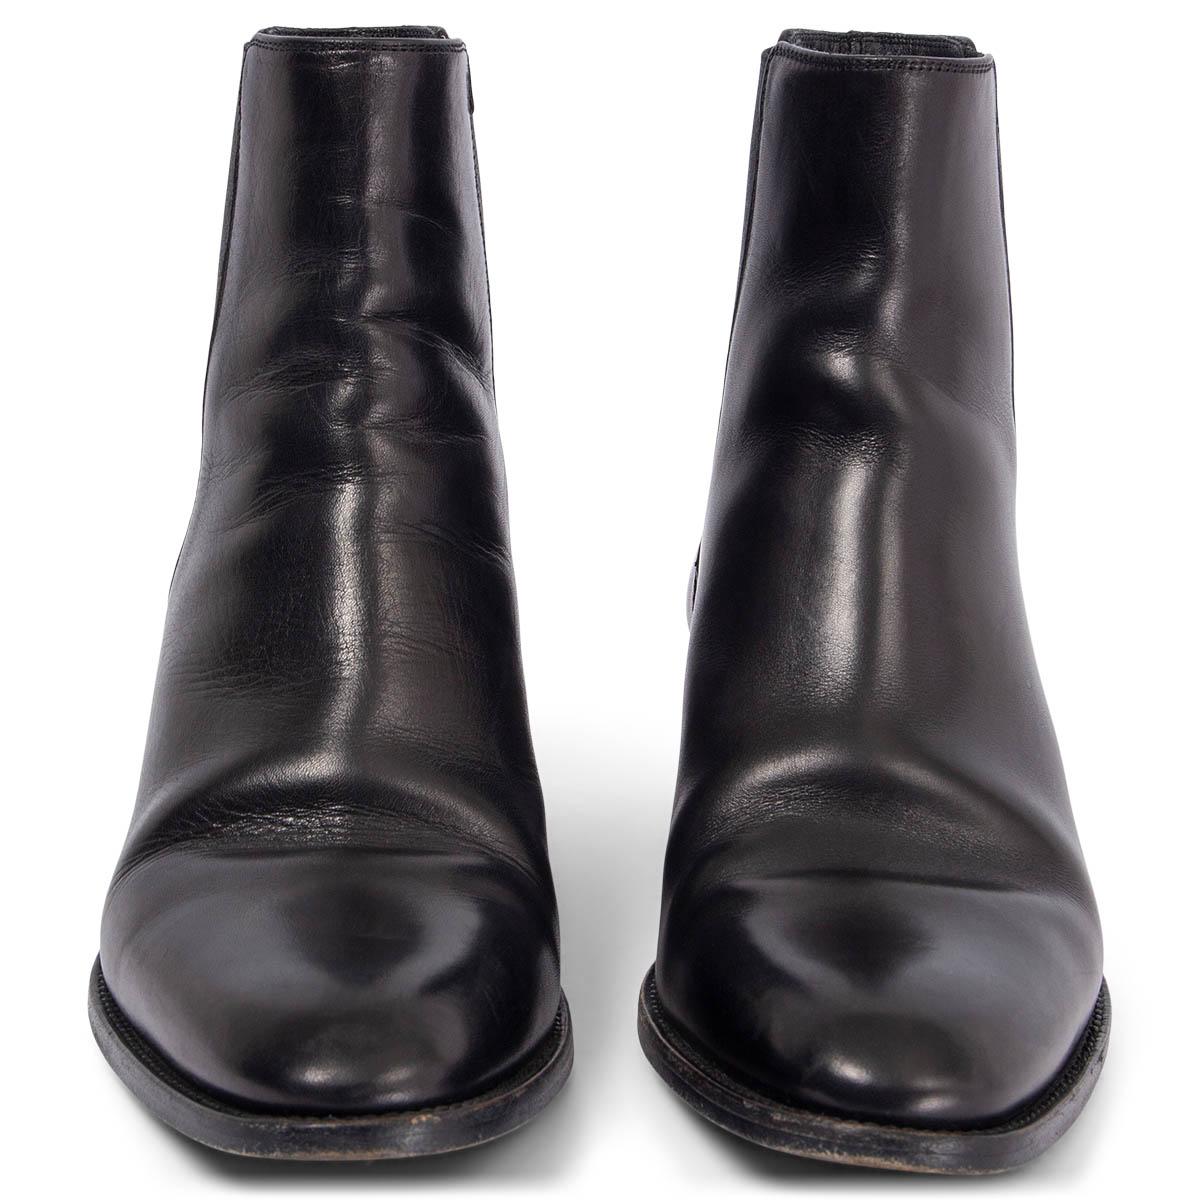 100% authentic Saint Laurent Wyatt 40 chelsea ankle-boots in black smooth calfskin with stretchy inserts on the side. Have been worn and show some creasing. Overall in very good condition. 

Measurements
Imprinted Size	38
Shoe Size	38
Inside